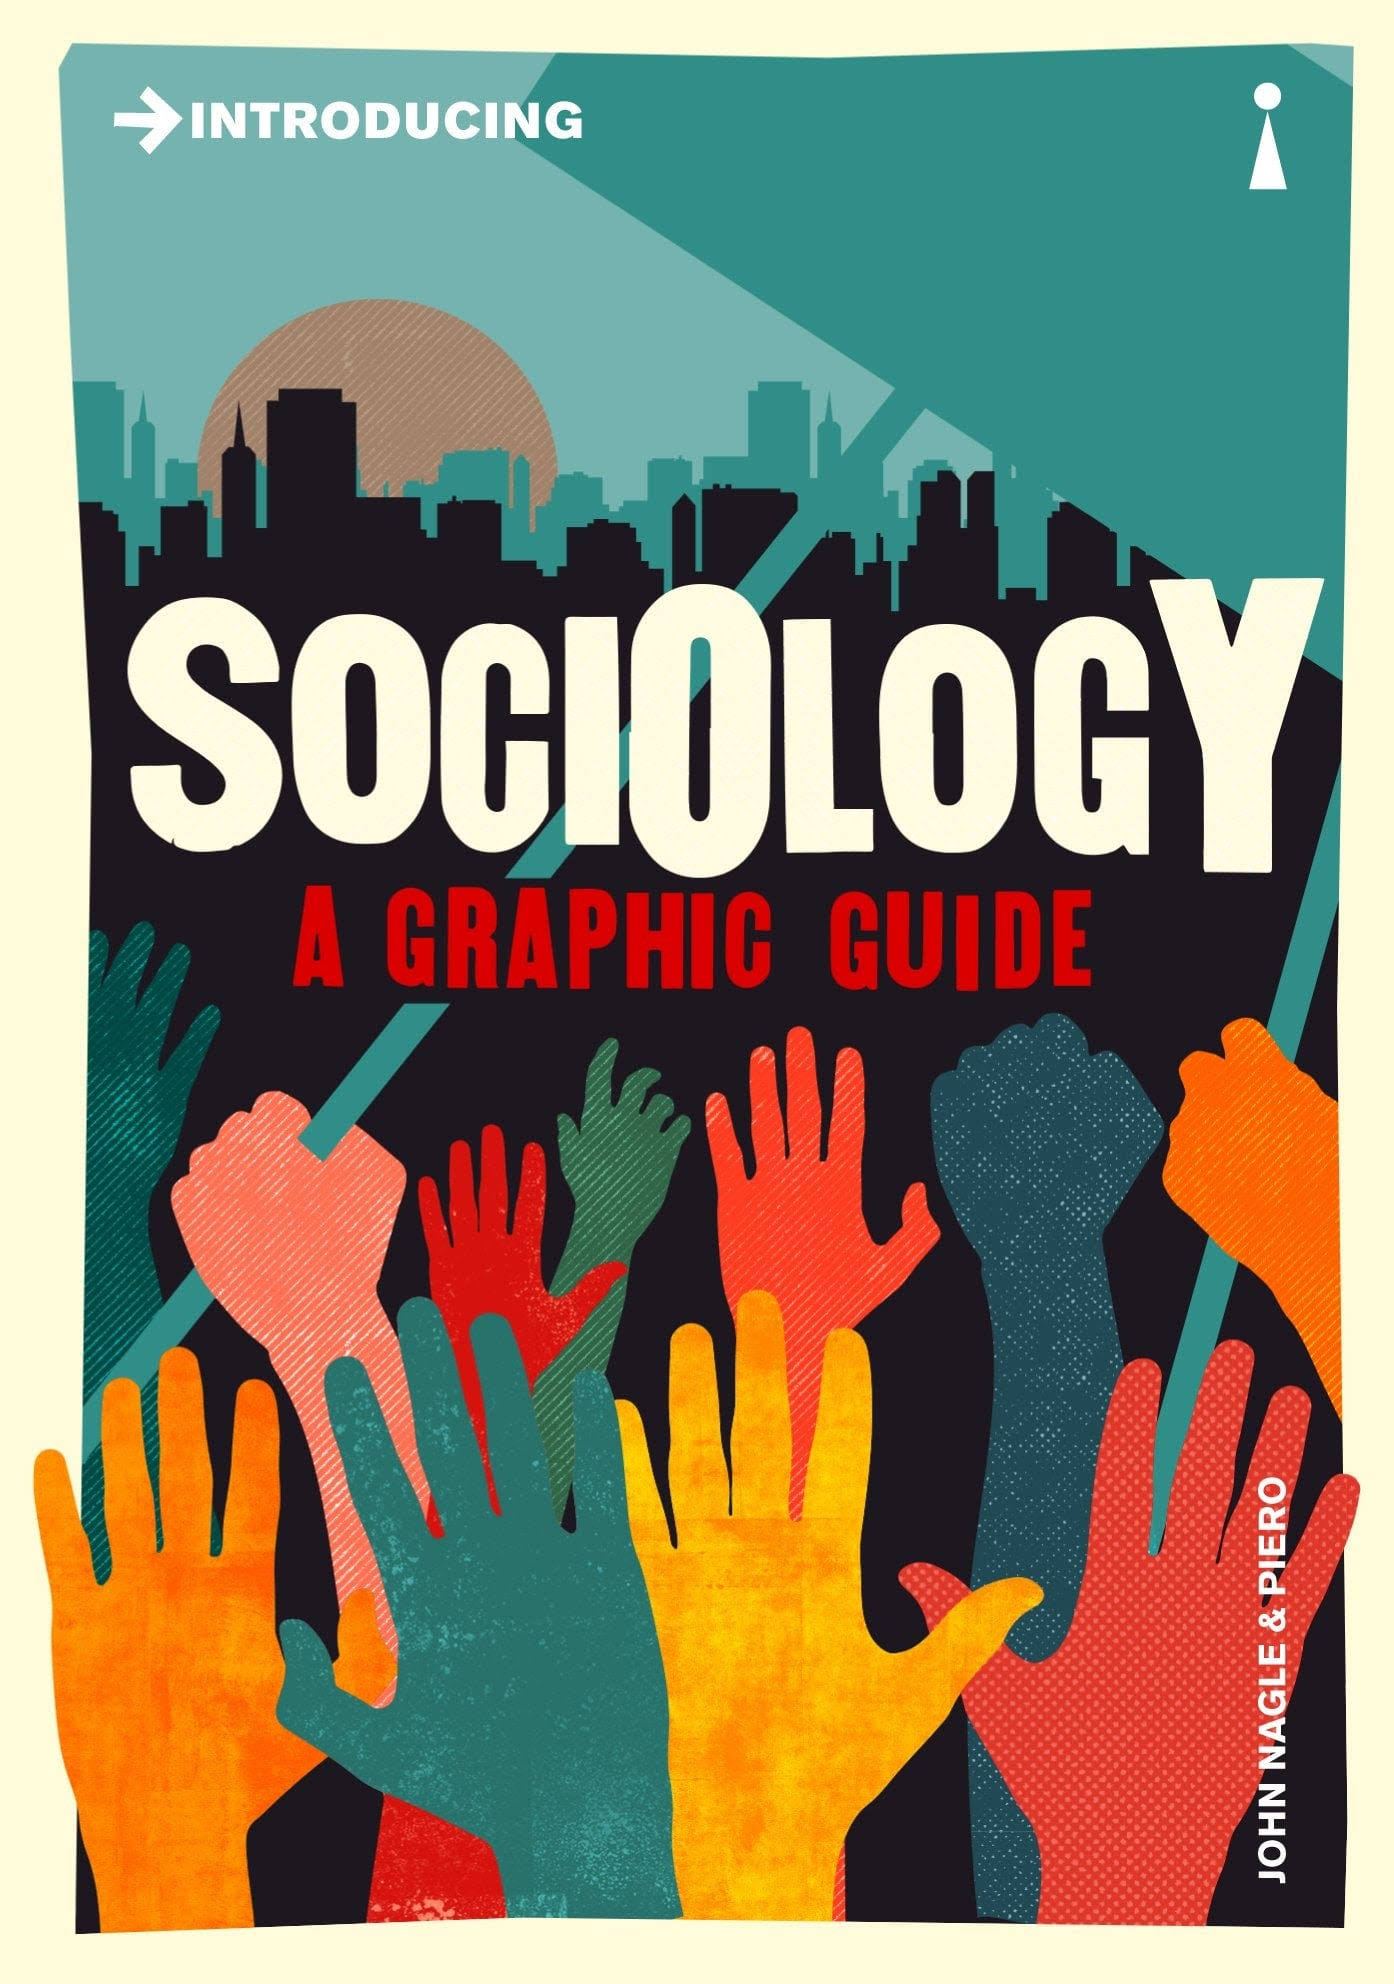 Introducing Sociology: A Graphic Guide [Book]